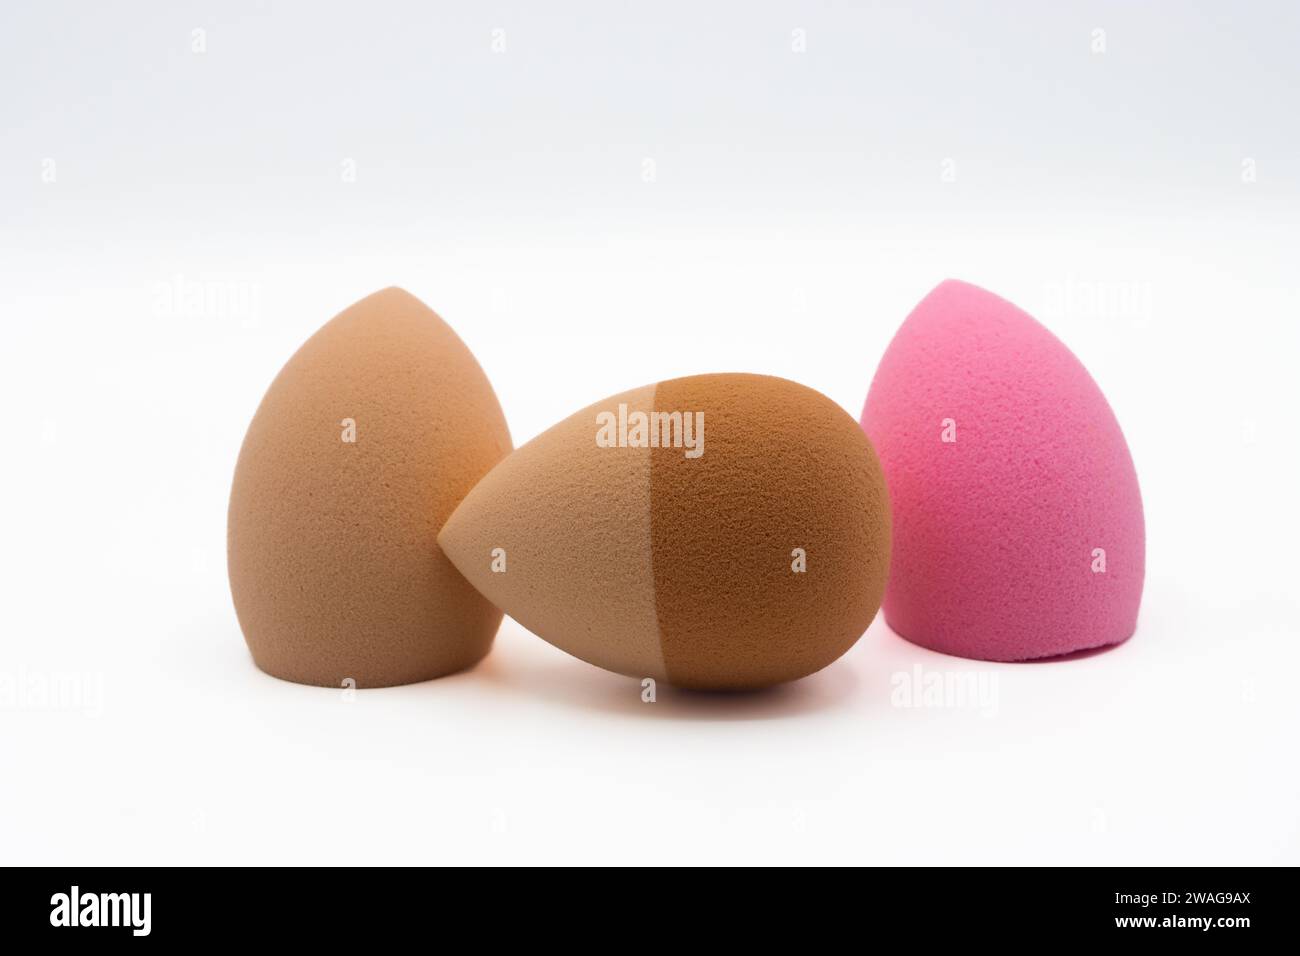 Multicolored beauty blenders. Three sponges for applying makeup on white background Stock Photo